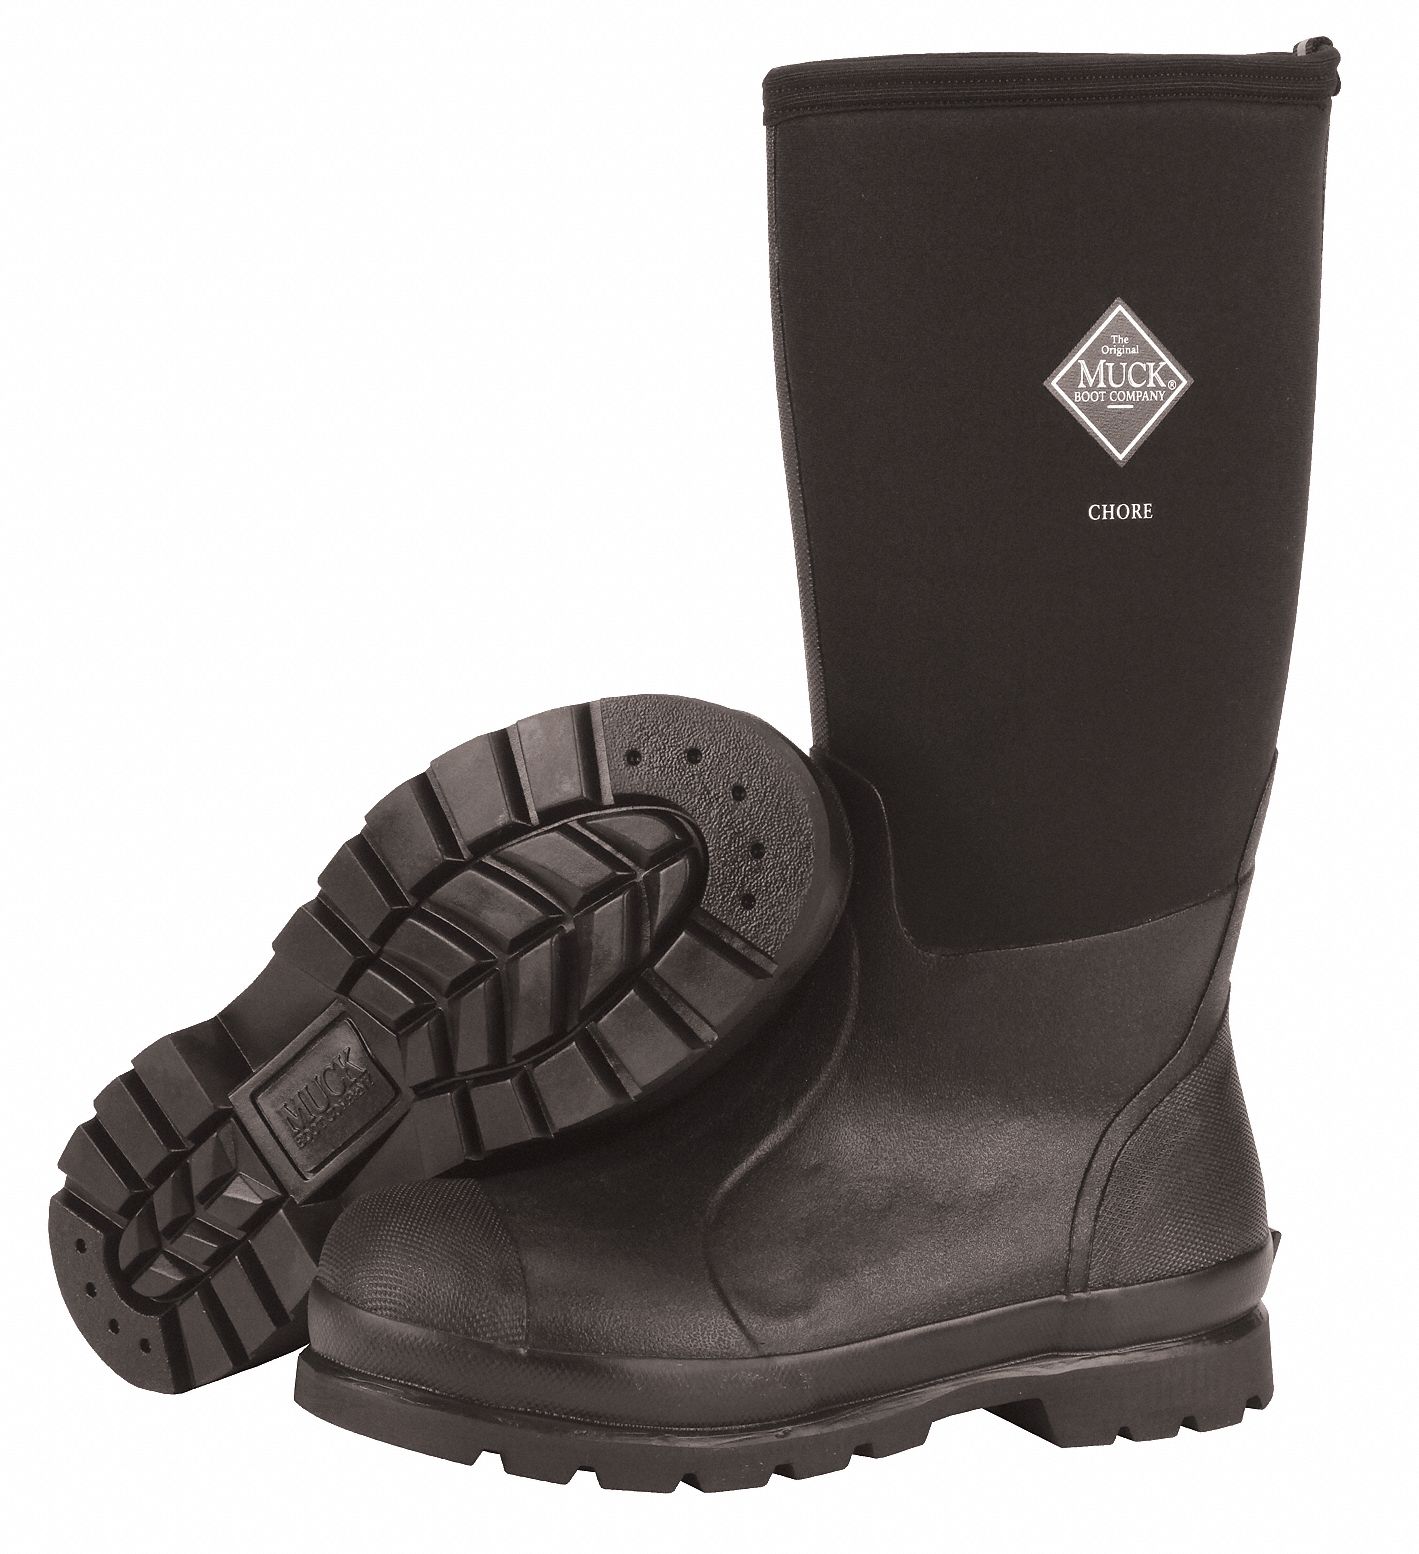 Eh Rated Muck Boots | manminchurch.se